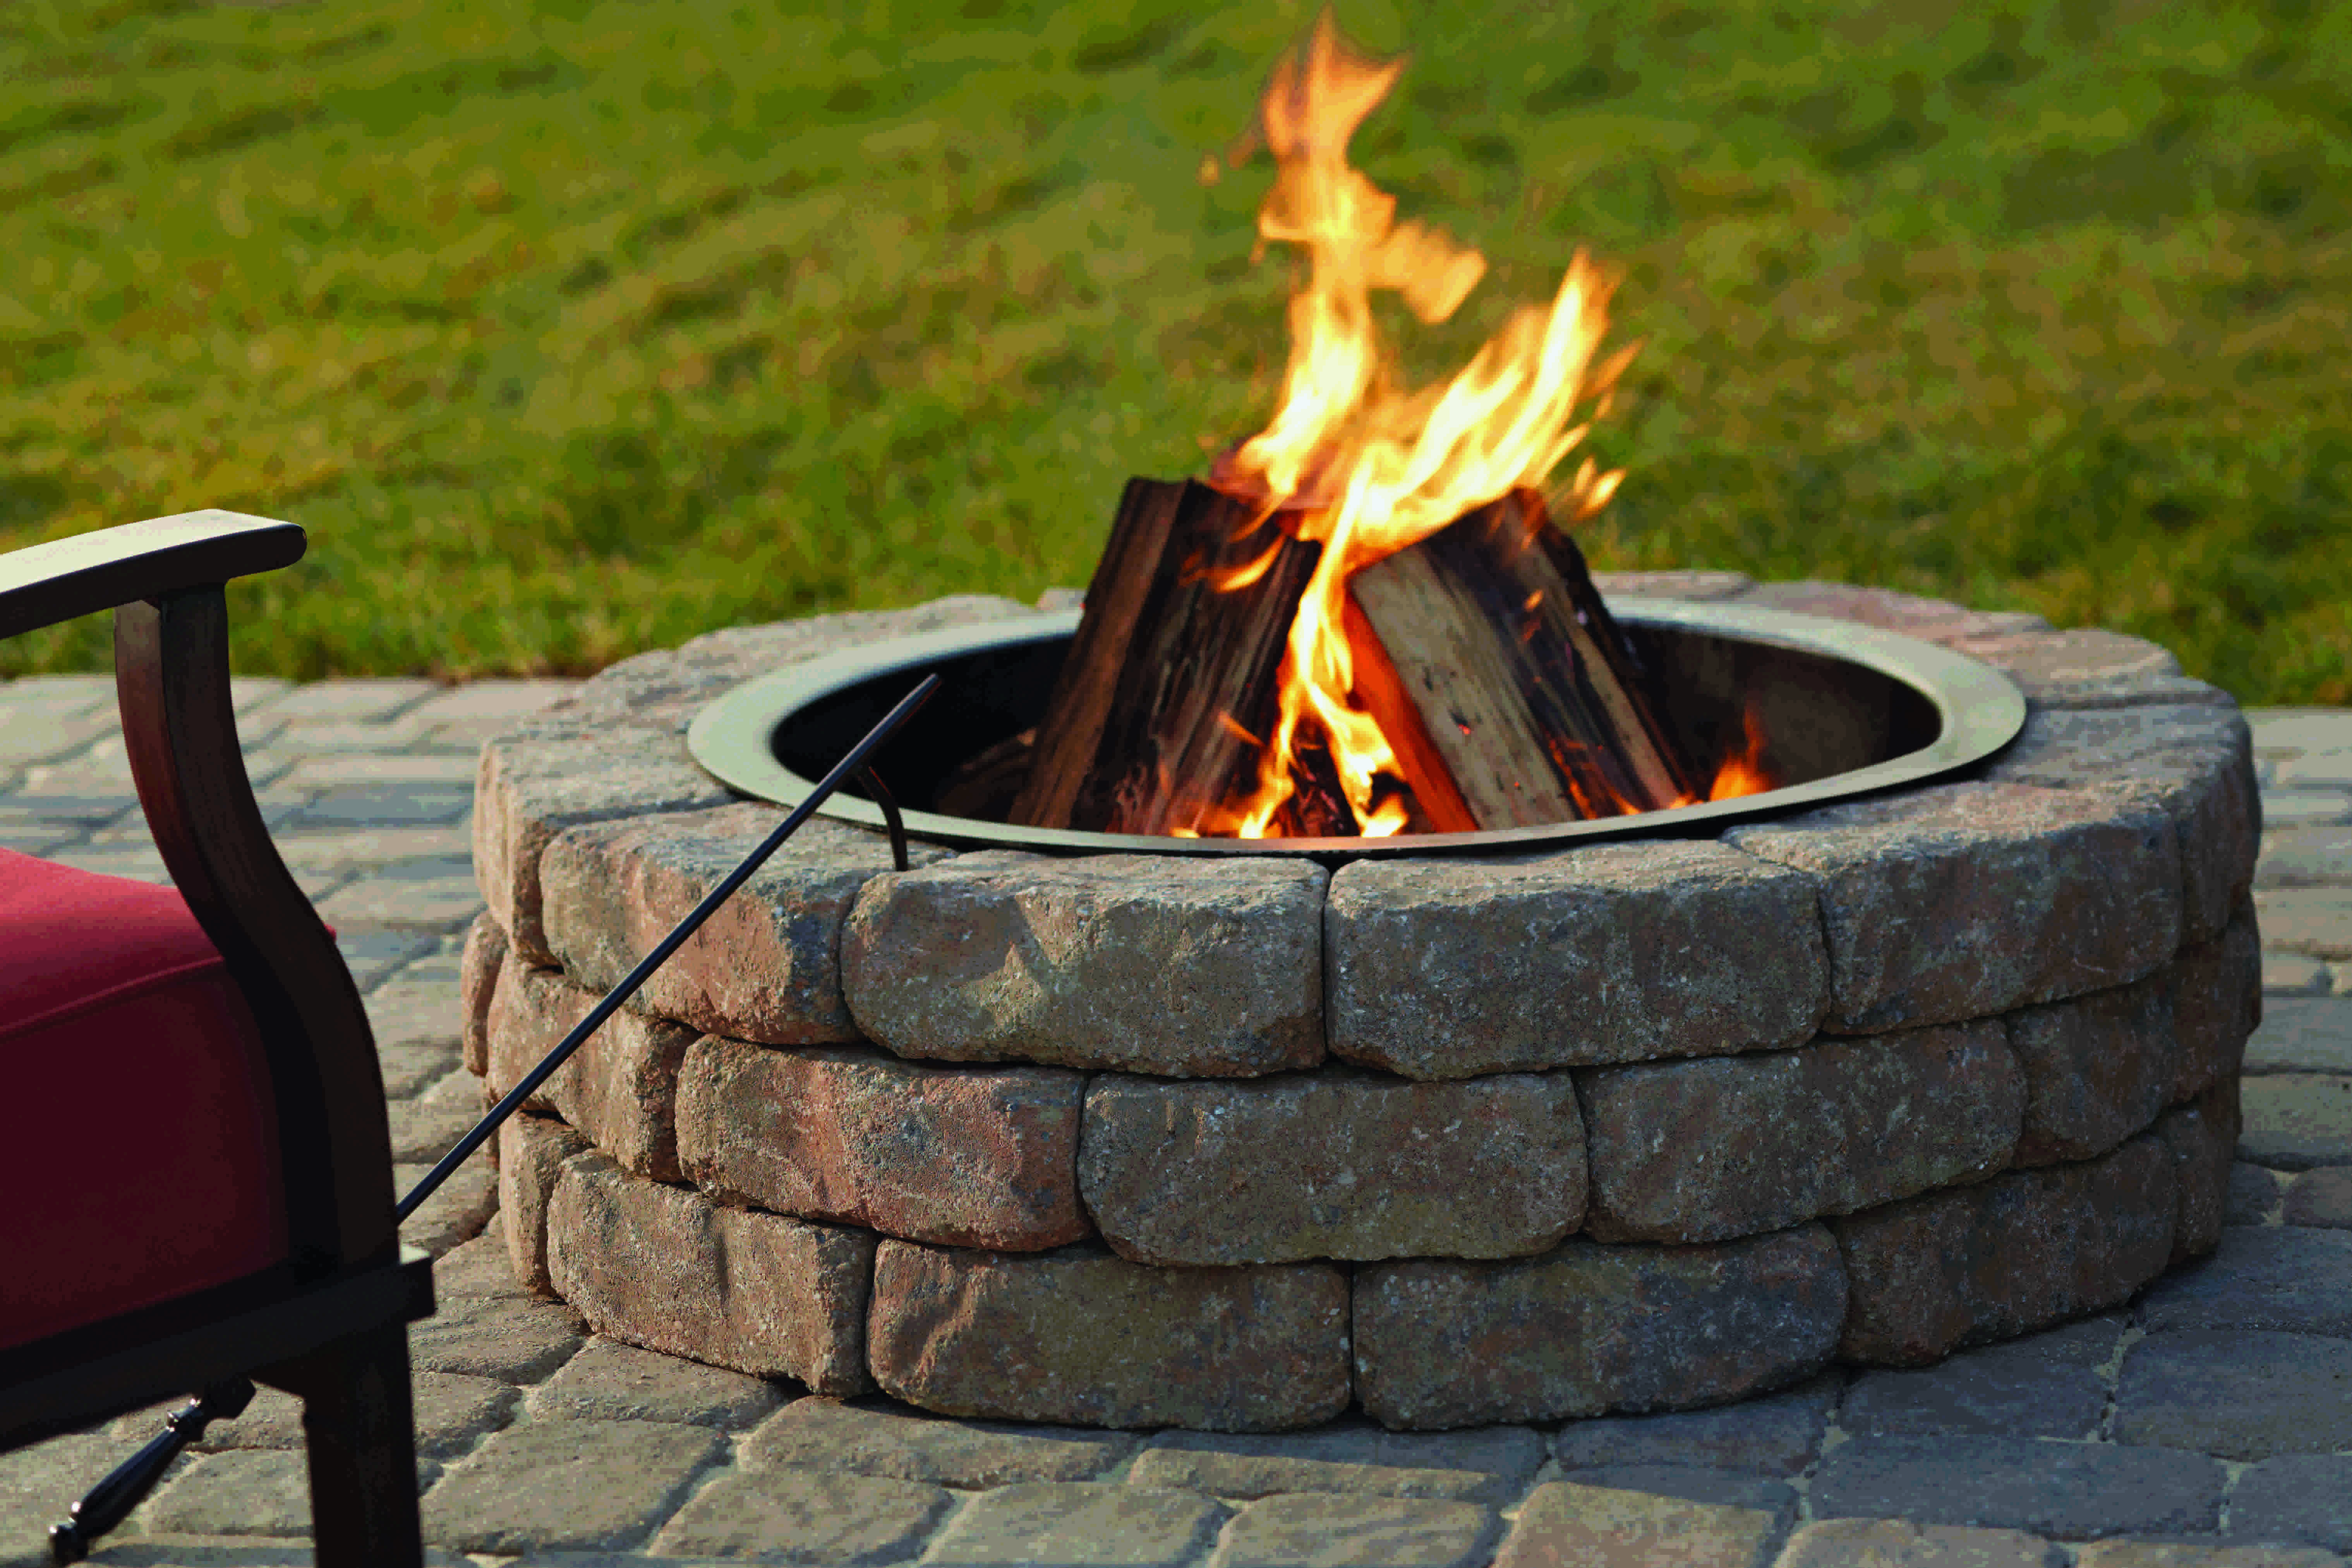 Belgard Holds Second Annual Giveaway, S Mores Fire Pit Kit